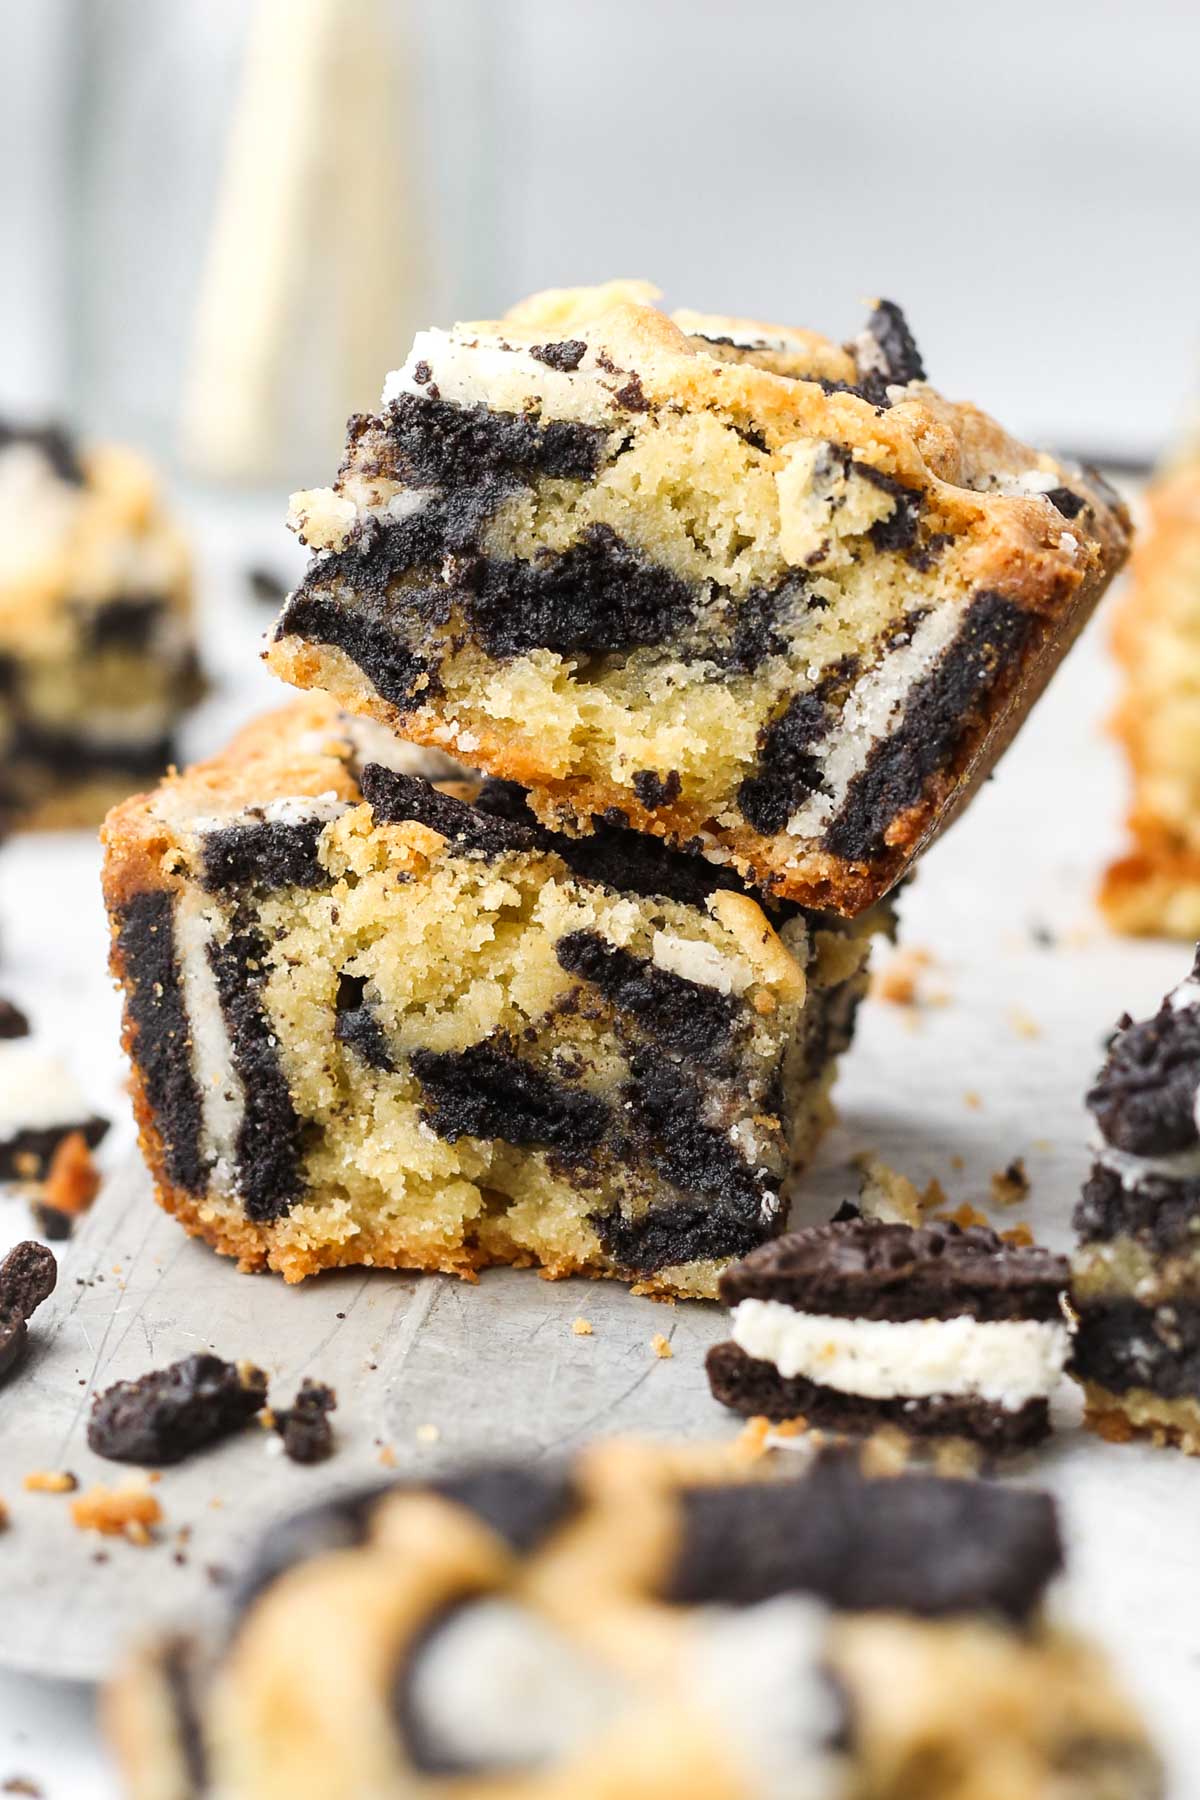 two oreo blondies stacked on top of each other and shown from the side, with oreo cookies baked inside.